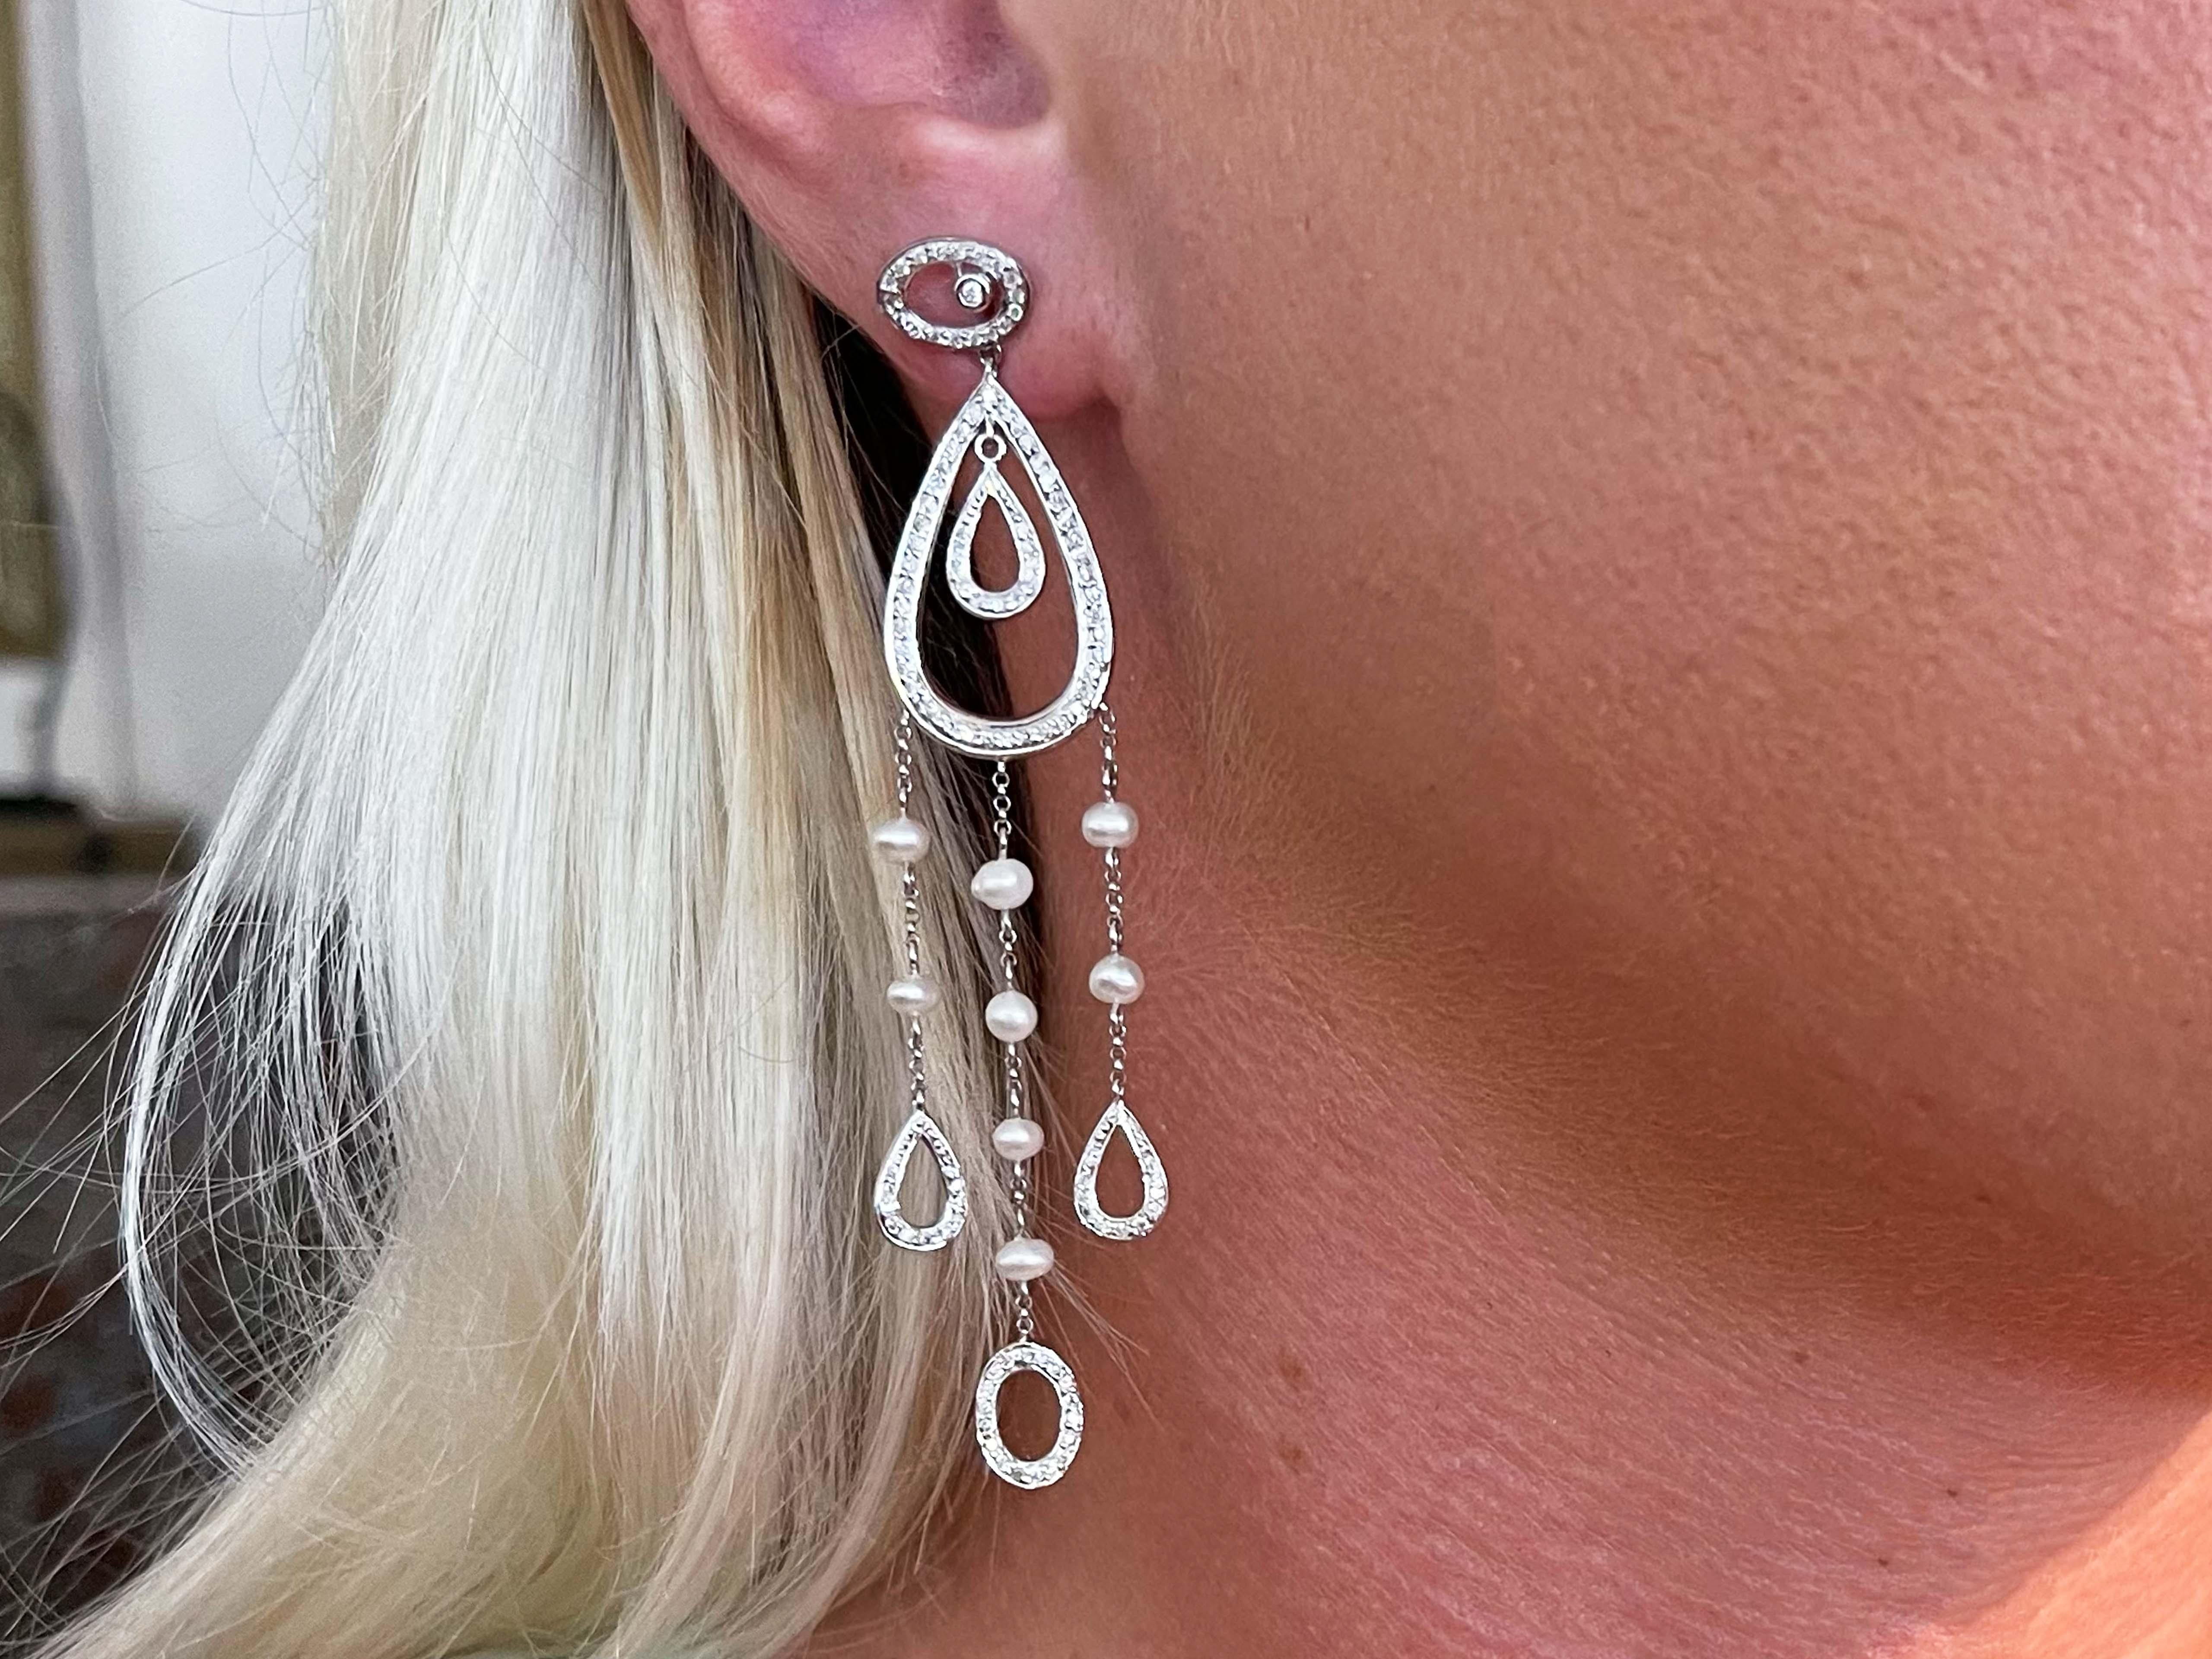 Item Specifications:

Metal: 14k White Gold

Total Weight: 10.3 Grams

Earring Diameter: 3.3